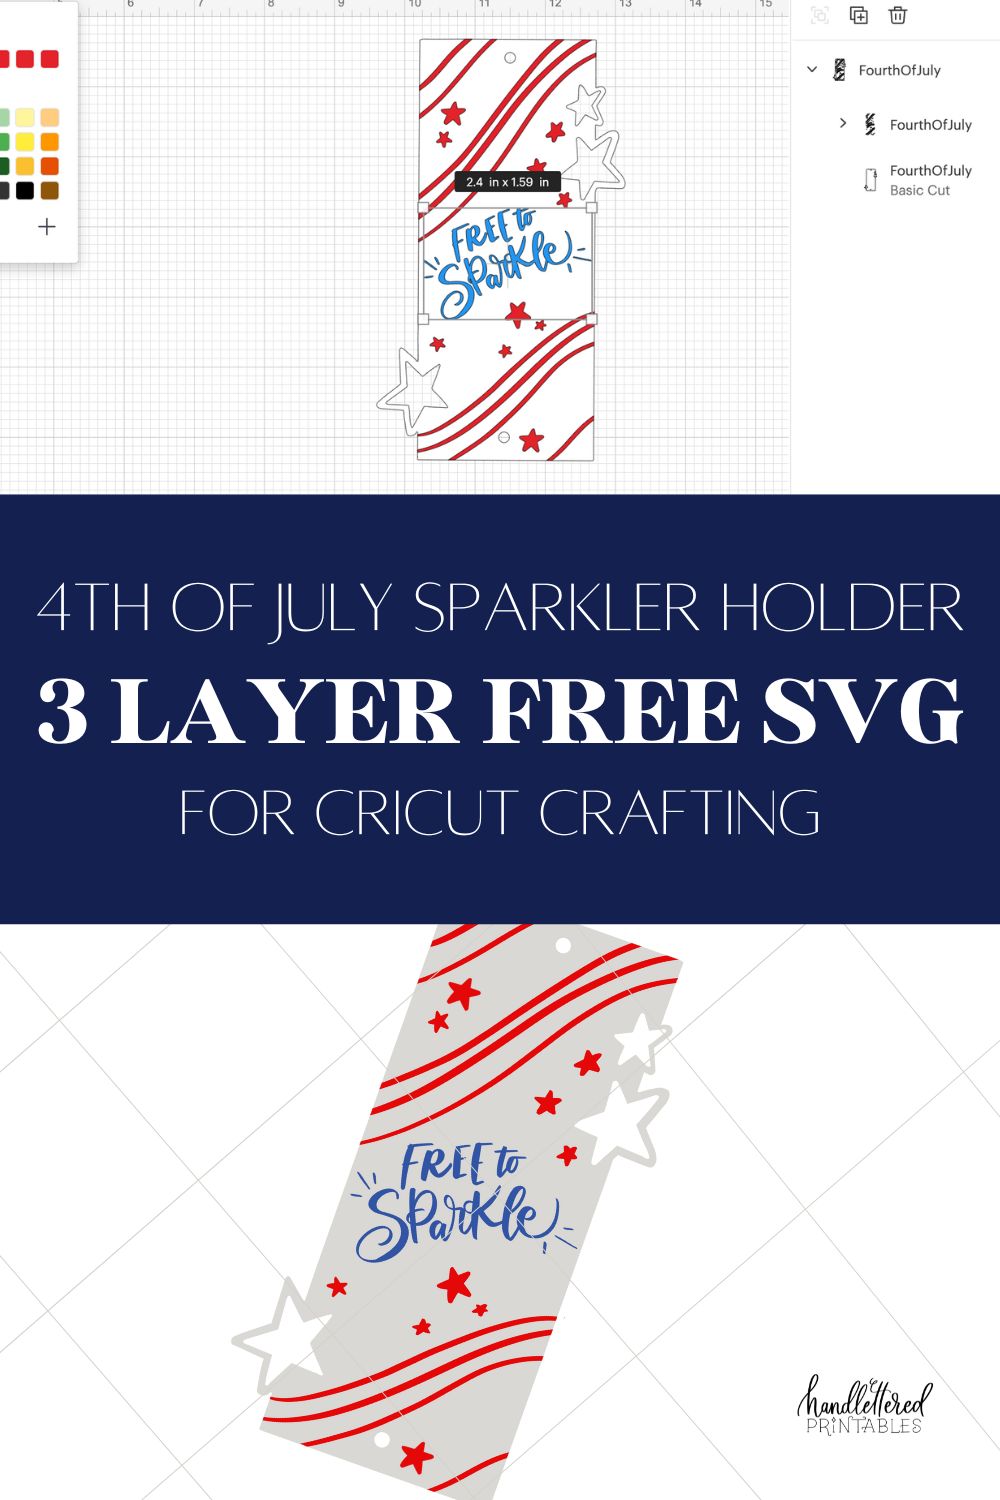 image of fourth of july sparklers holders free svg file with 3 layers, shown uploaded in Cricut Design space bottom image of the svg file on white background text over reads: 4th of july sparkler holder 3 layer free svg file for cricut crafting